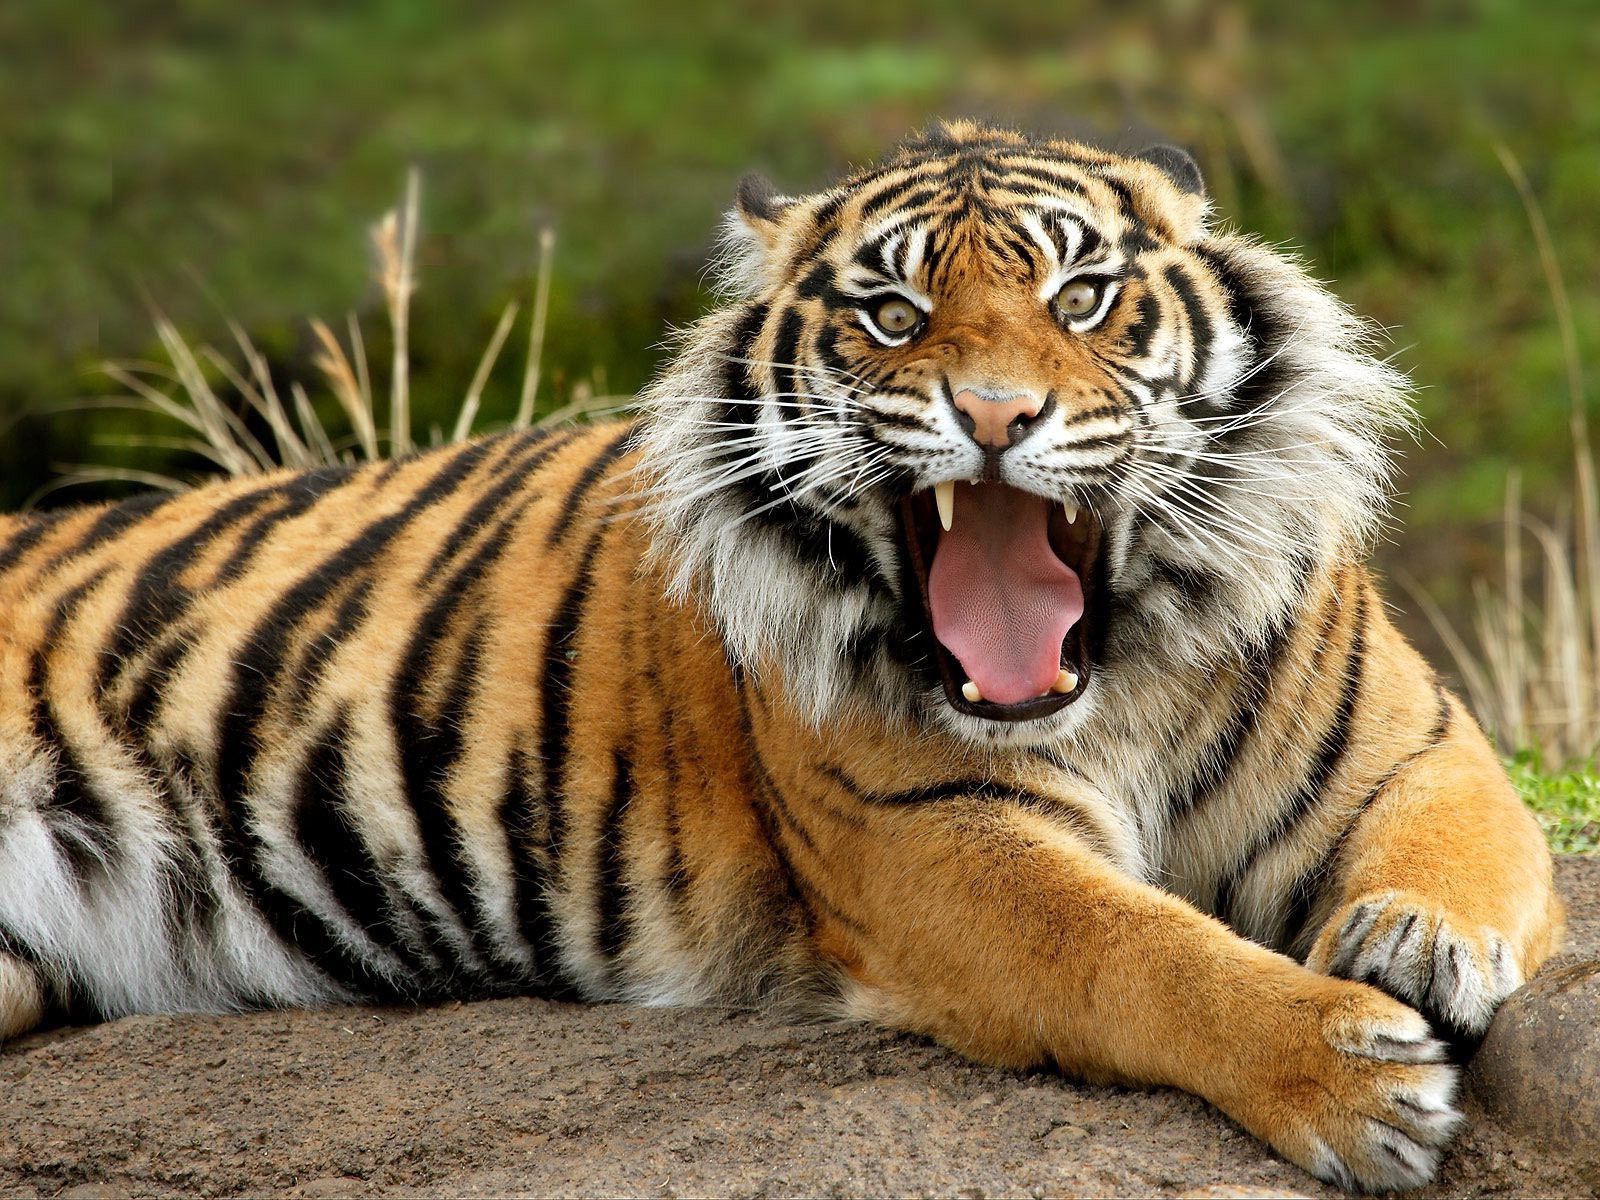 Tiger Backgrounds Pictures - Wallpaper Cave